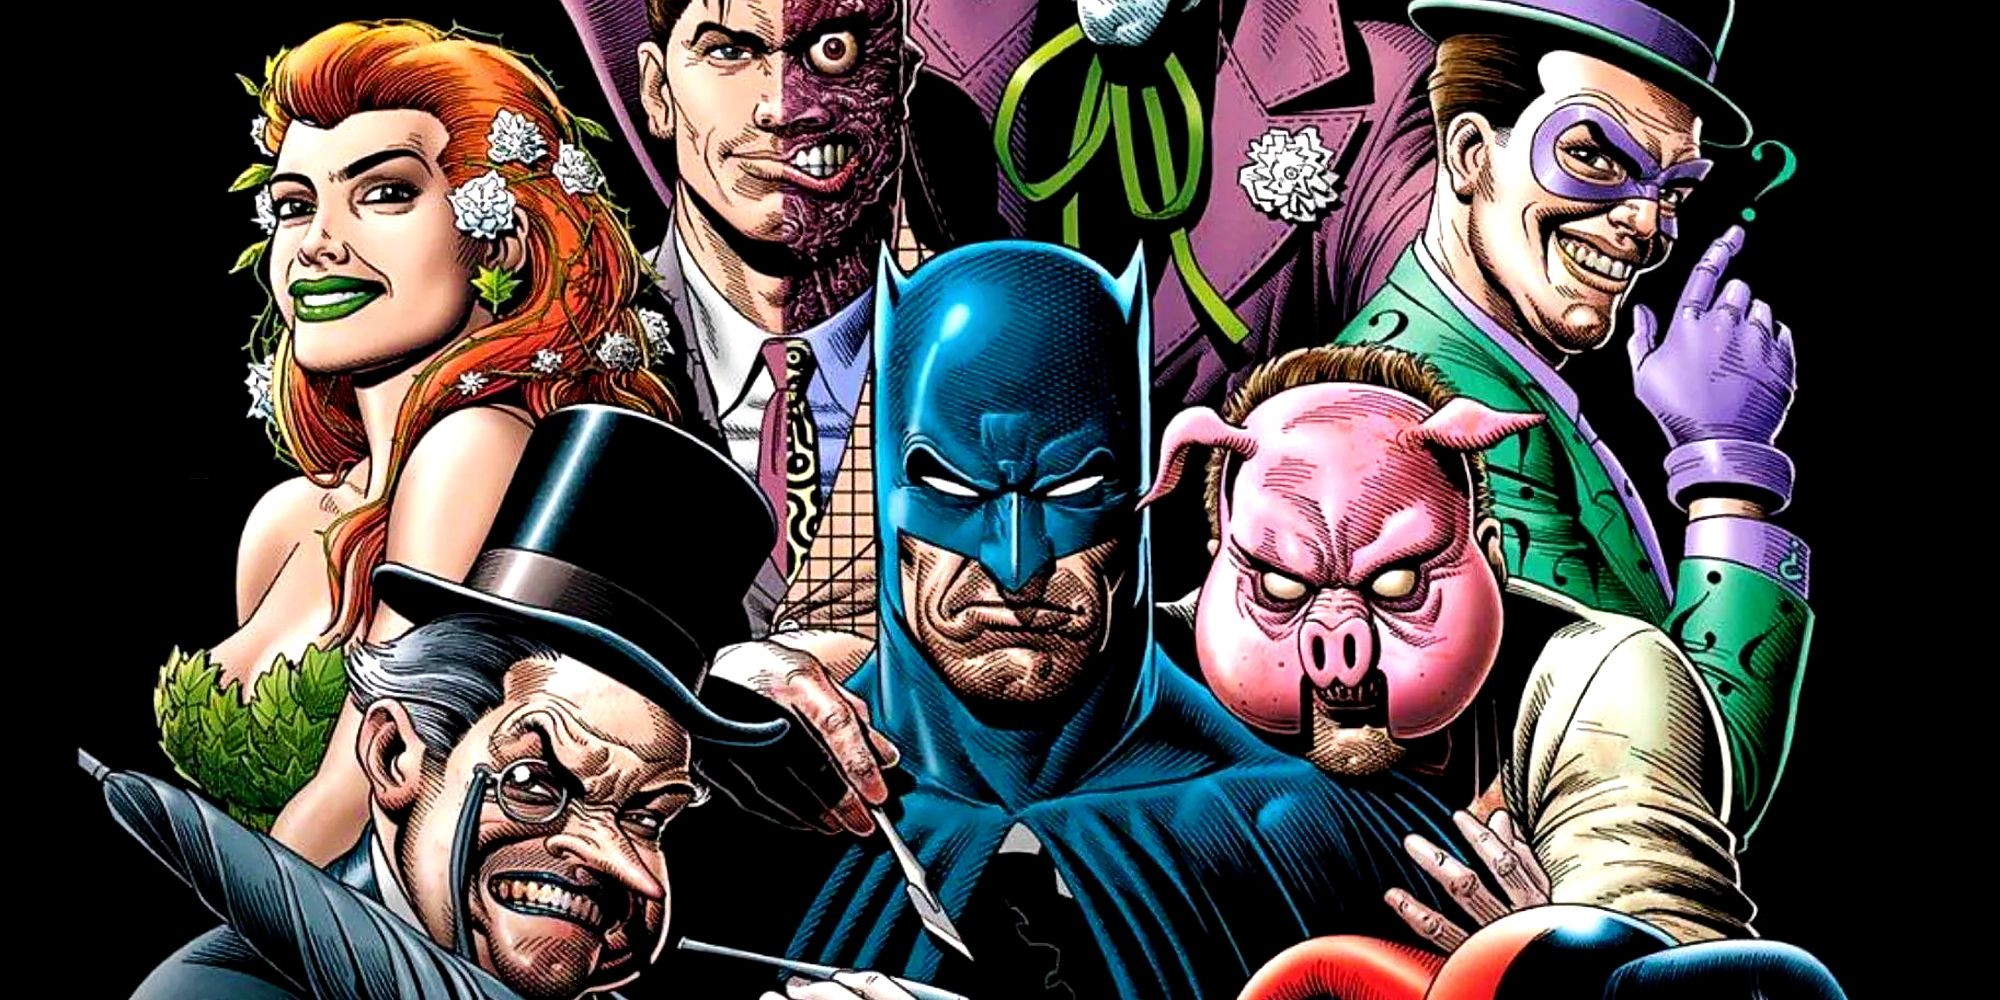 Who are the top 15 members of the Rogues' Gallery from “Batman”? - Quora